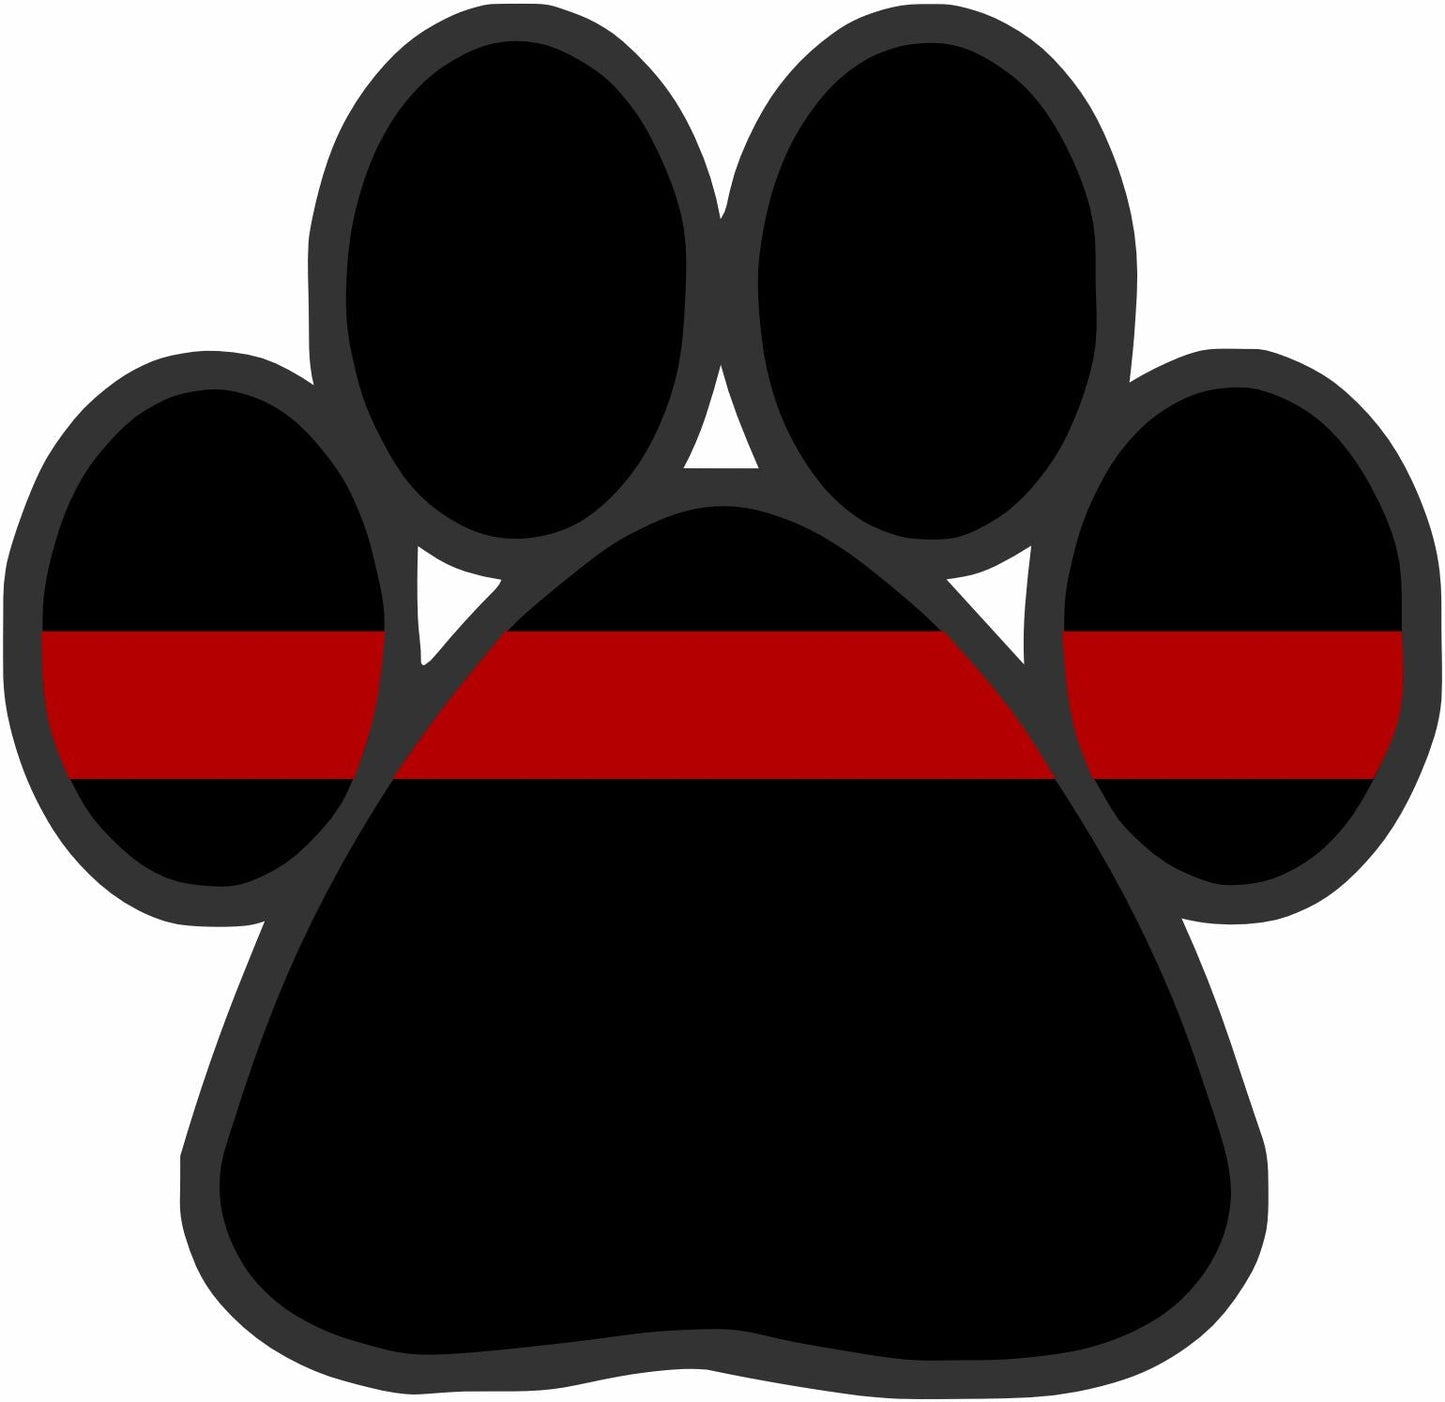 K9 Paw with Red Line Blacklite Reflective Decal - Powercall Sirens LLC